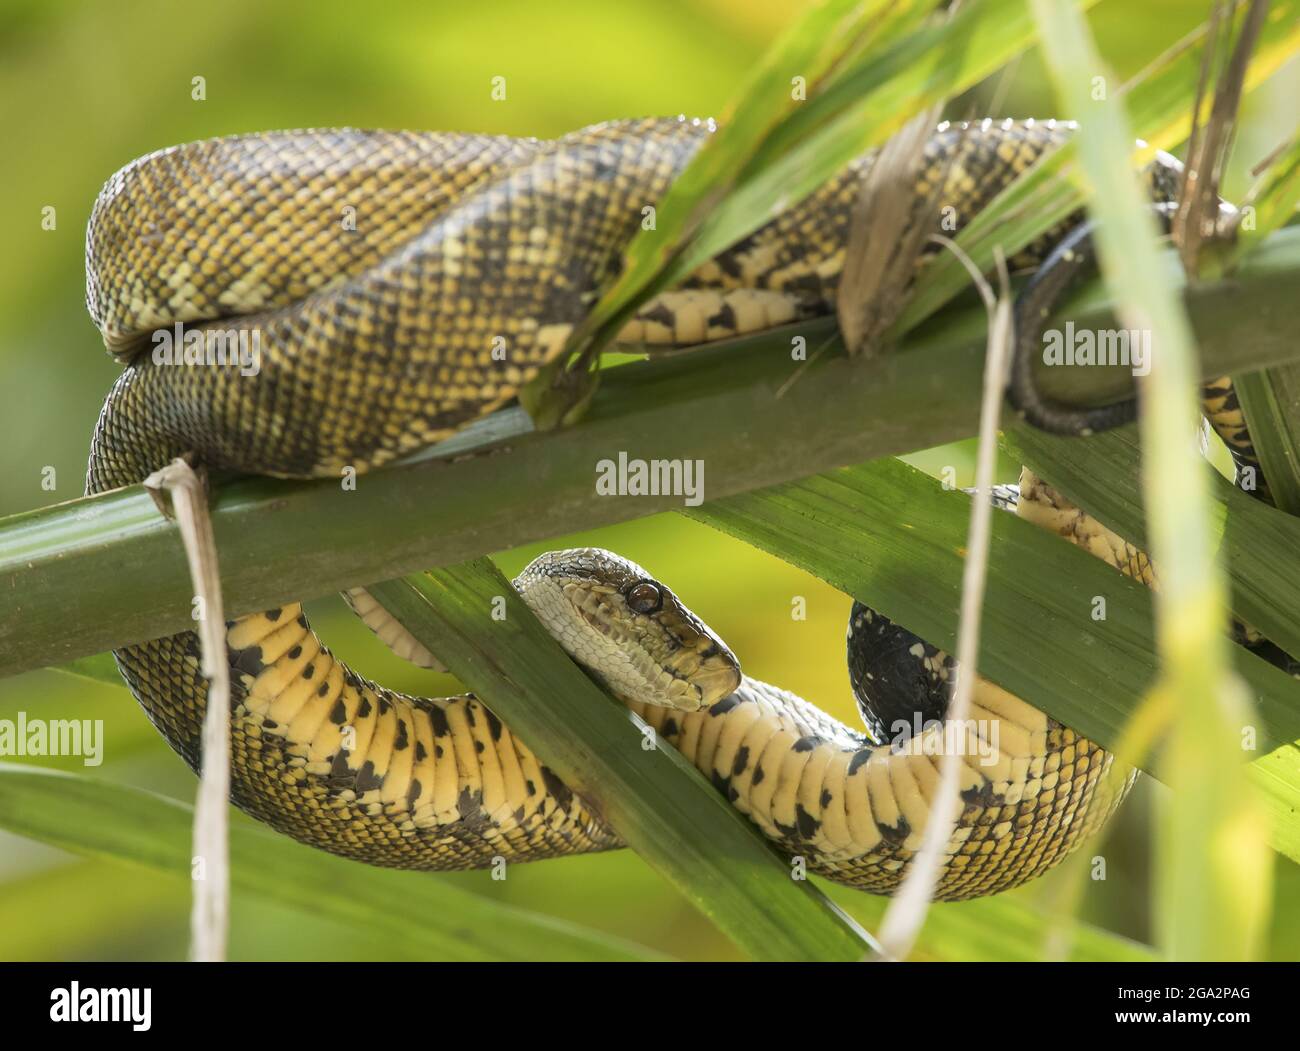 A Garden tree boa (Corallus hortulanus) rests coiled up on a tree branch; Puntarenas, Costa Rica Stock Photo